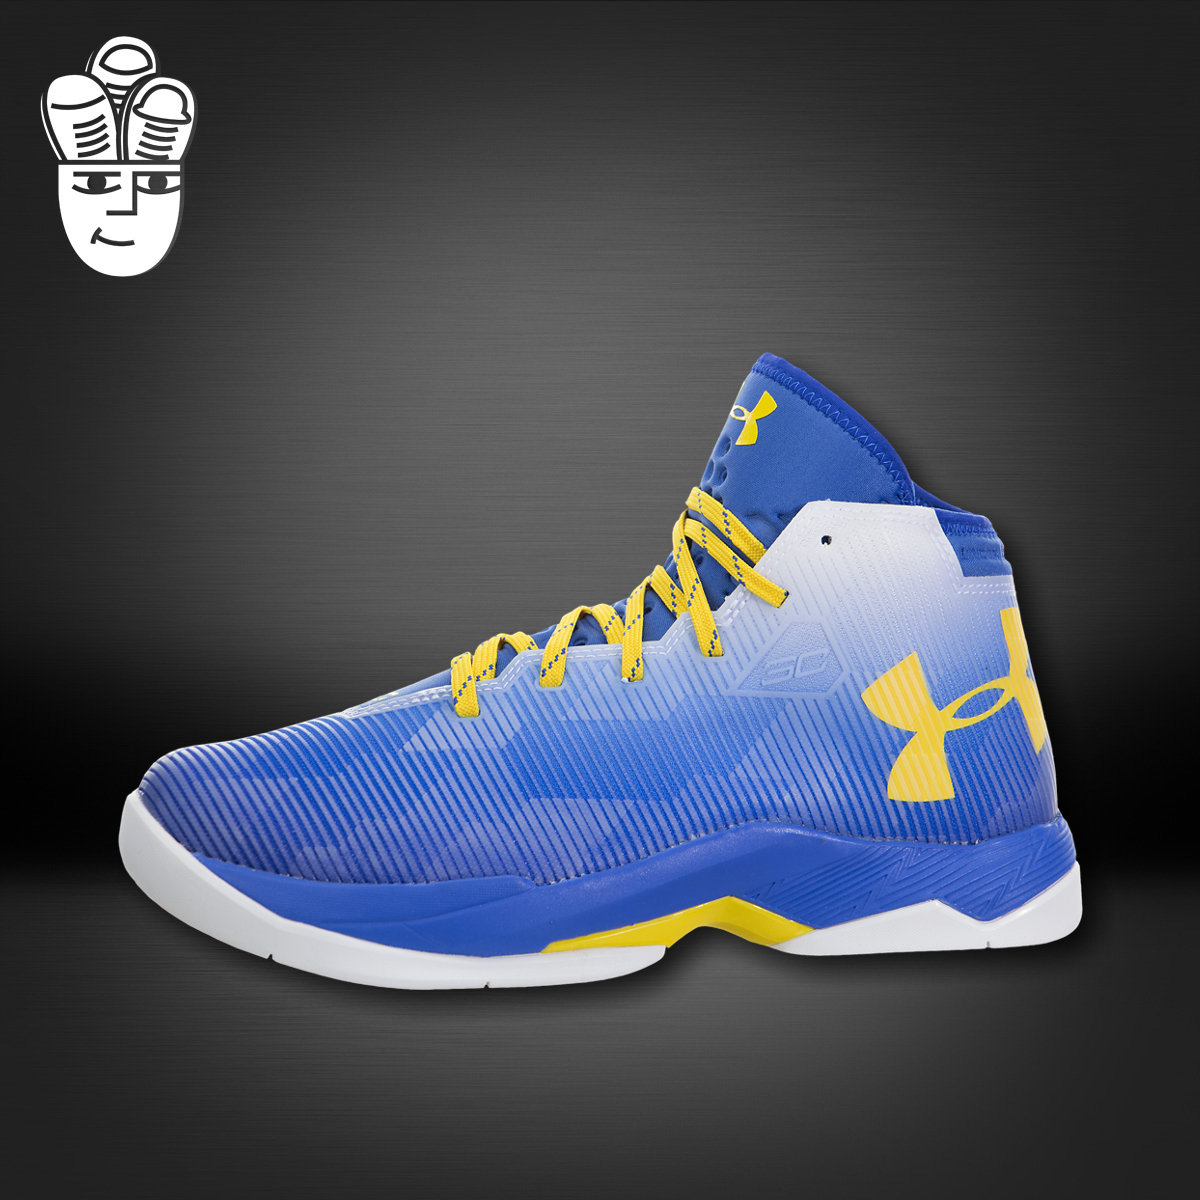 under armour men's curry 2.5 basketball shoe